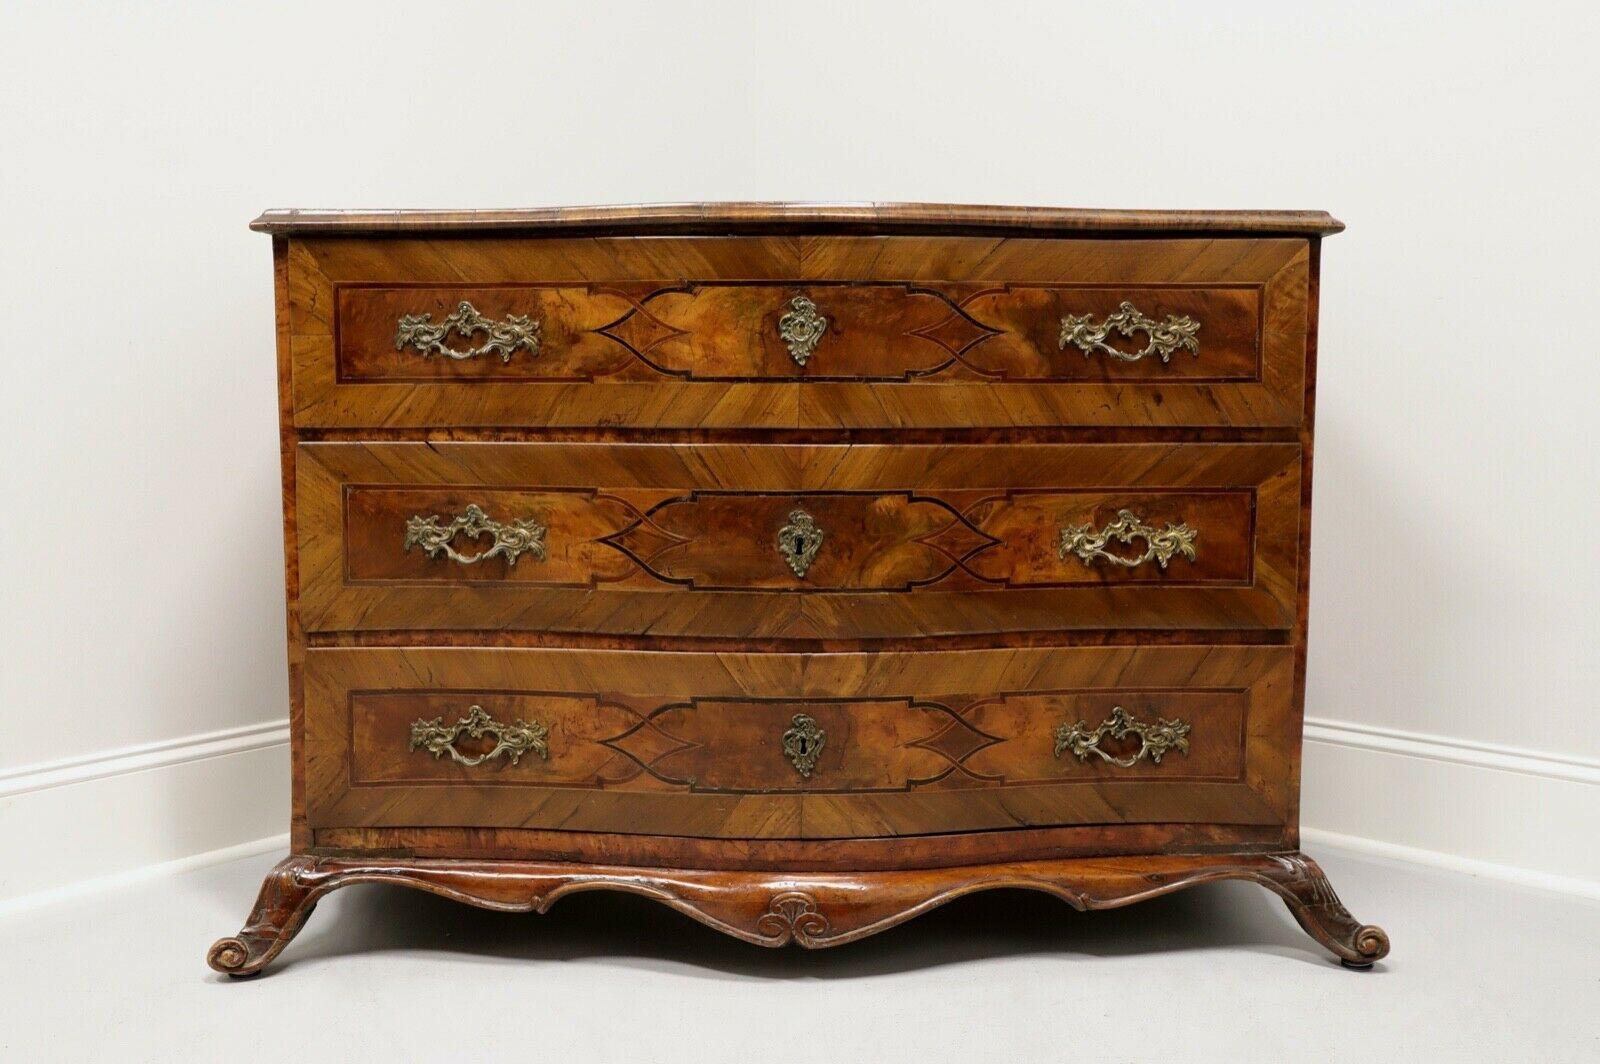 An antique German Baroque style bowfront three-drawer chest, unbranded. Walnut and veneers with brass hardware. Inlaid overall with parquetry and scrollwork inlay all raised on splayed scroll feet. Three dovetail drawers with faux lock plates on two